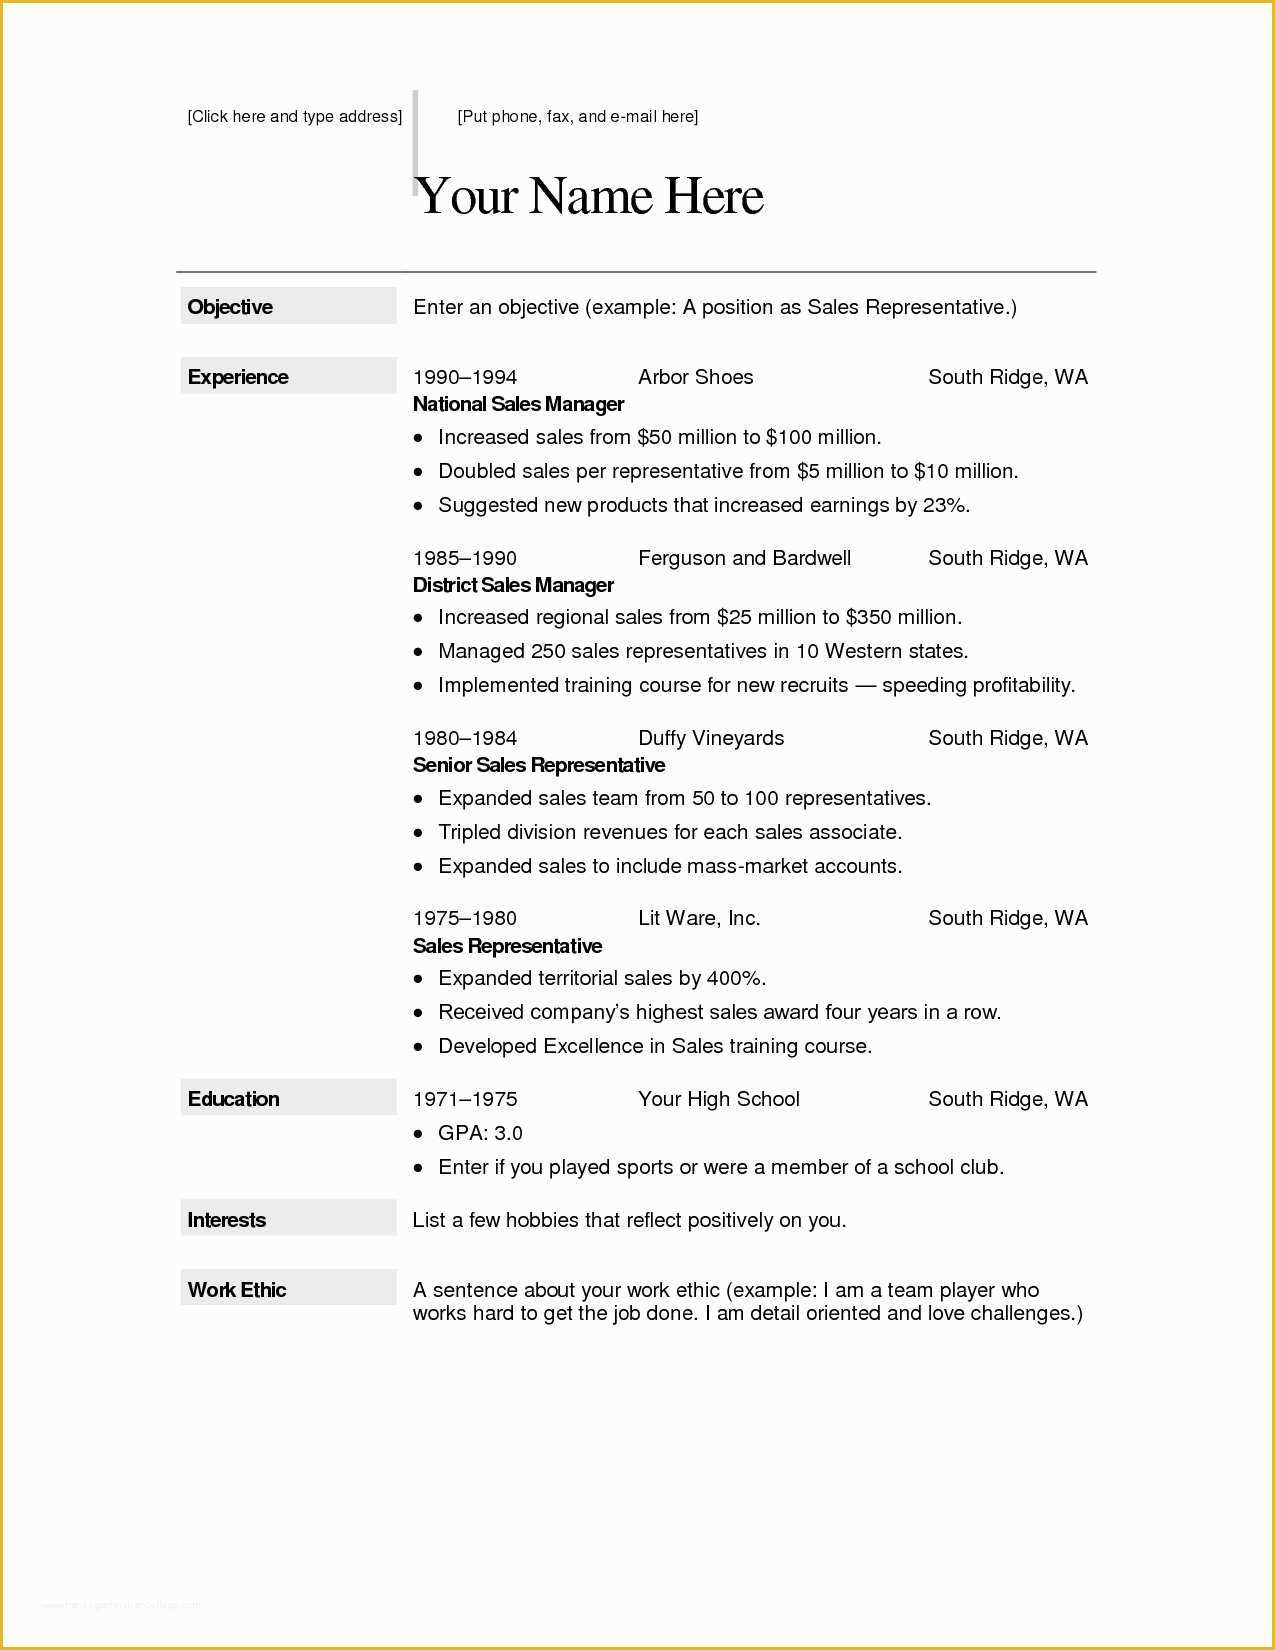 Download Free Resume Templates 2017 Of Free Resume Templates Download